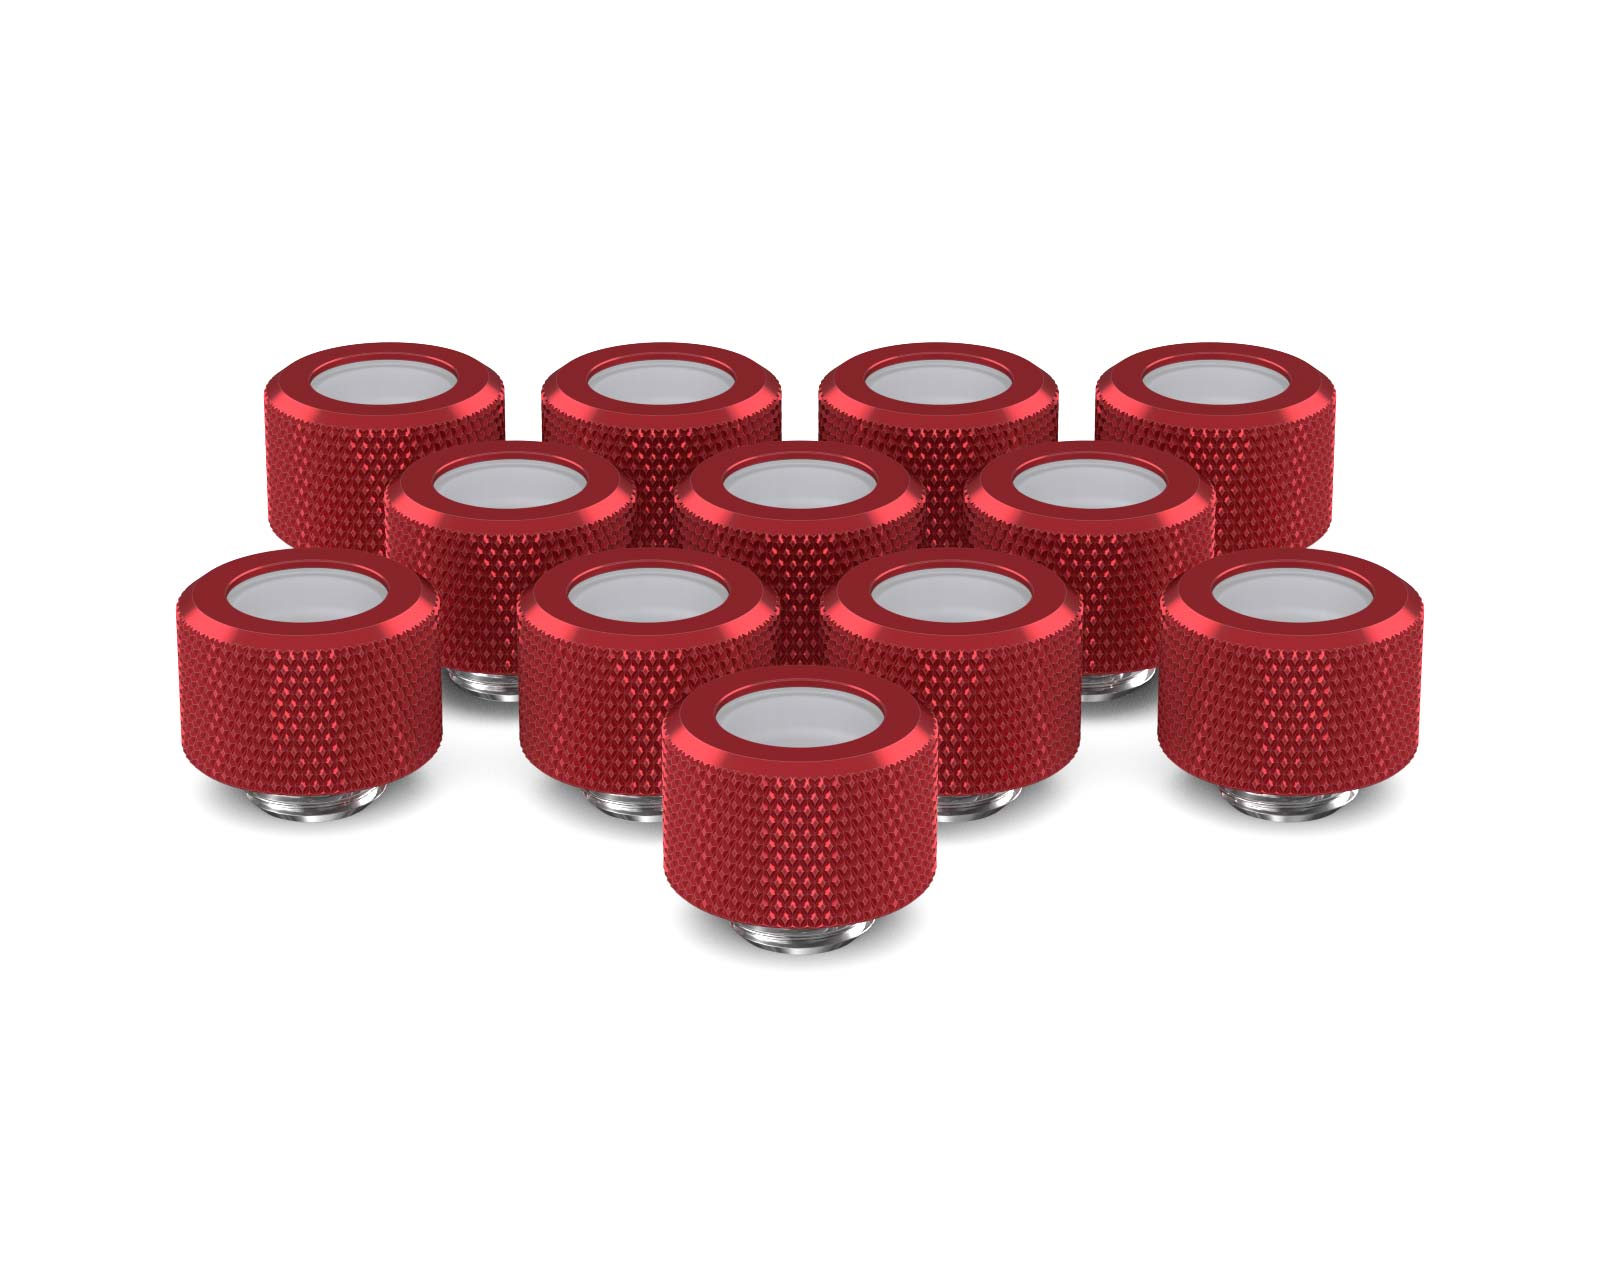 PrimoChill 14mm OD Rigid SX Fitting - 12 Pack - PrimoChill - KEEPING IT COOL Candy Red